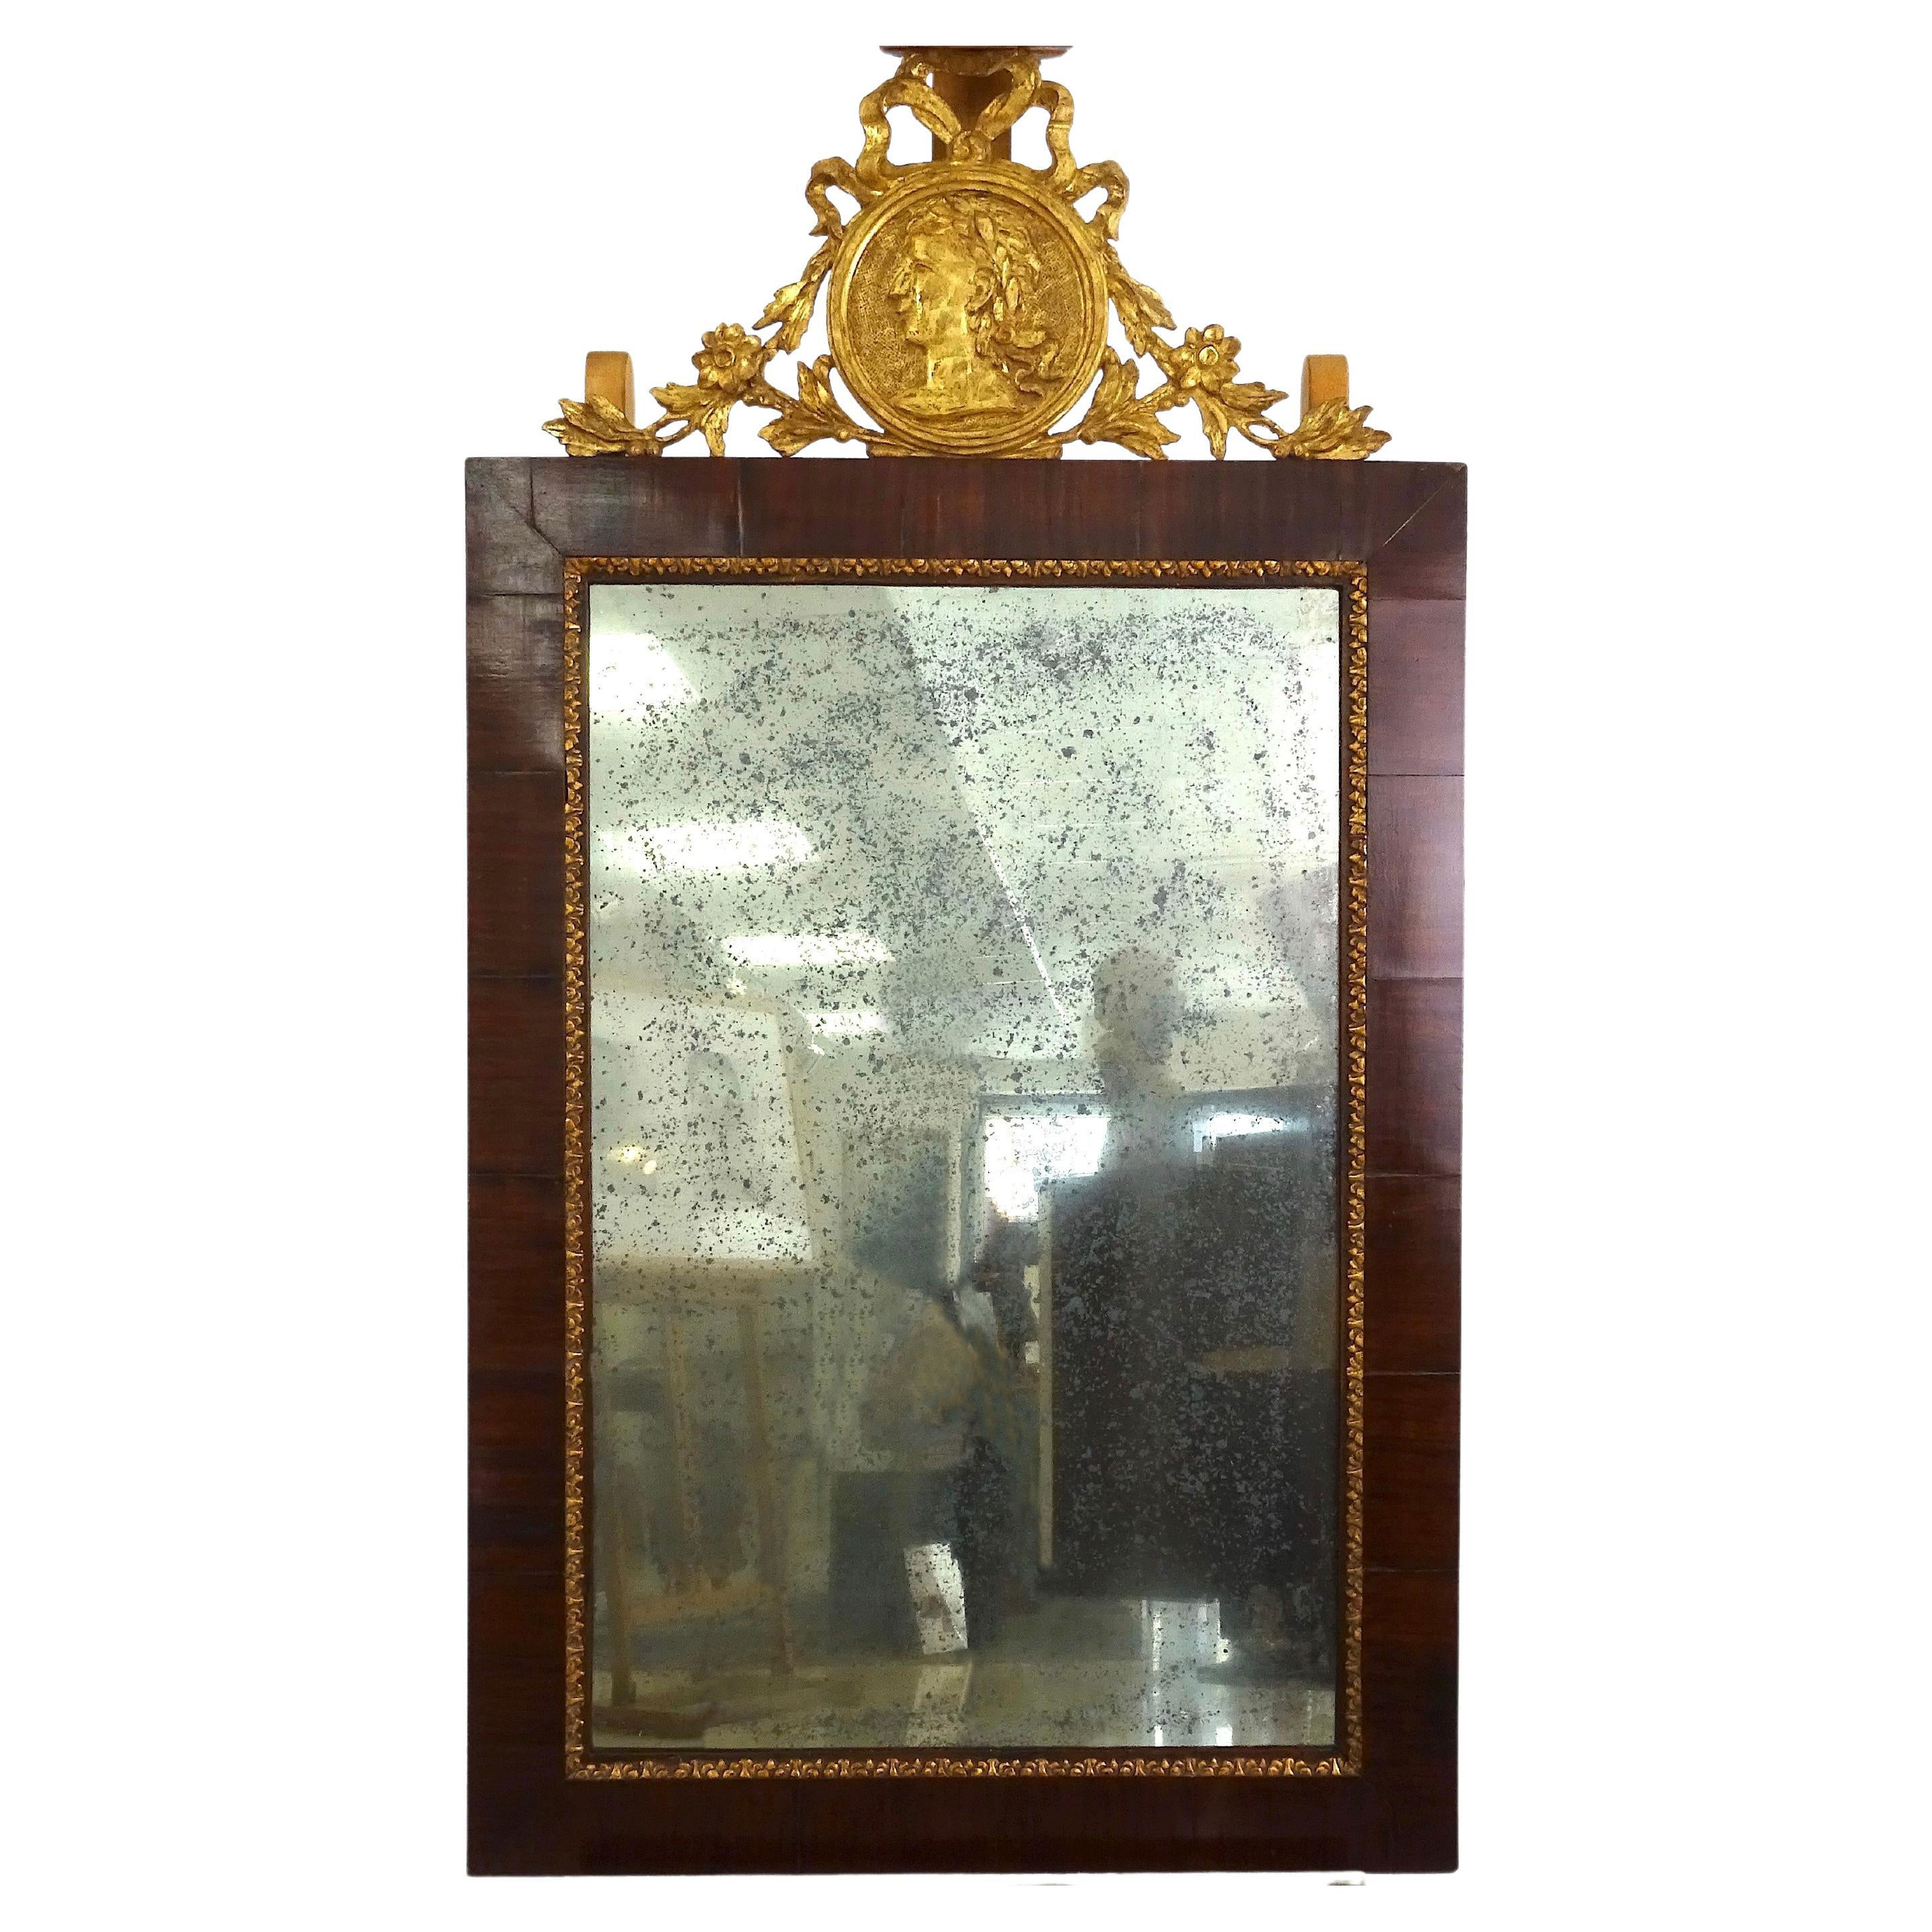 Frame with Mirror and Coping, France, 19th Century